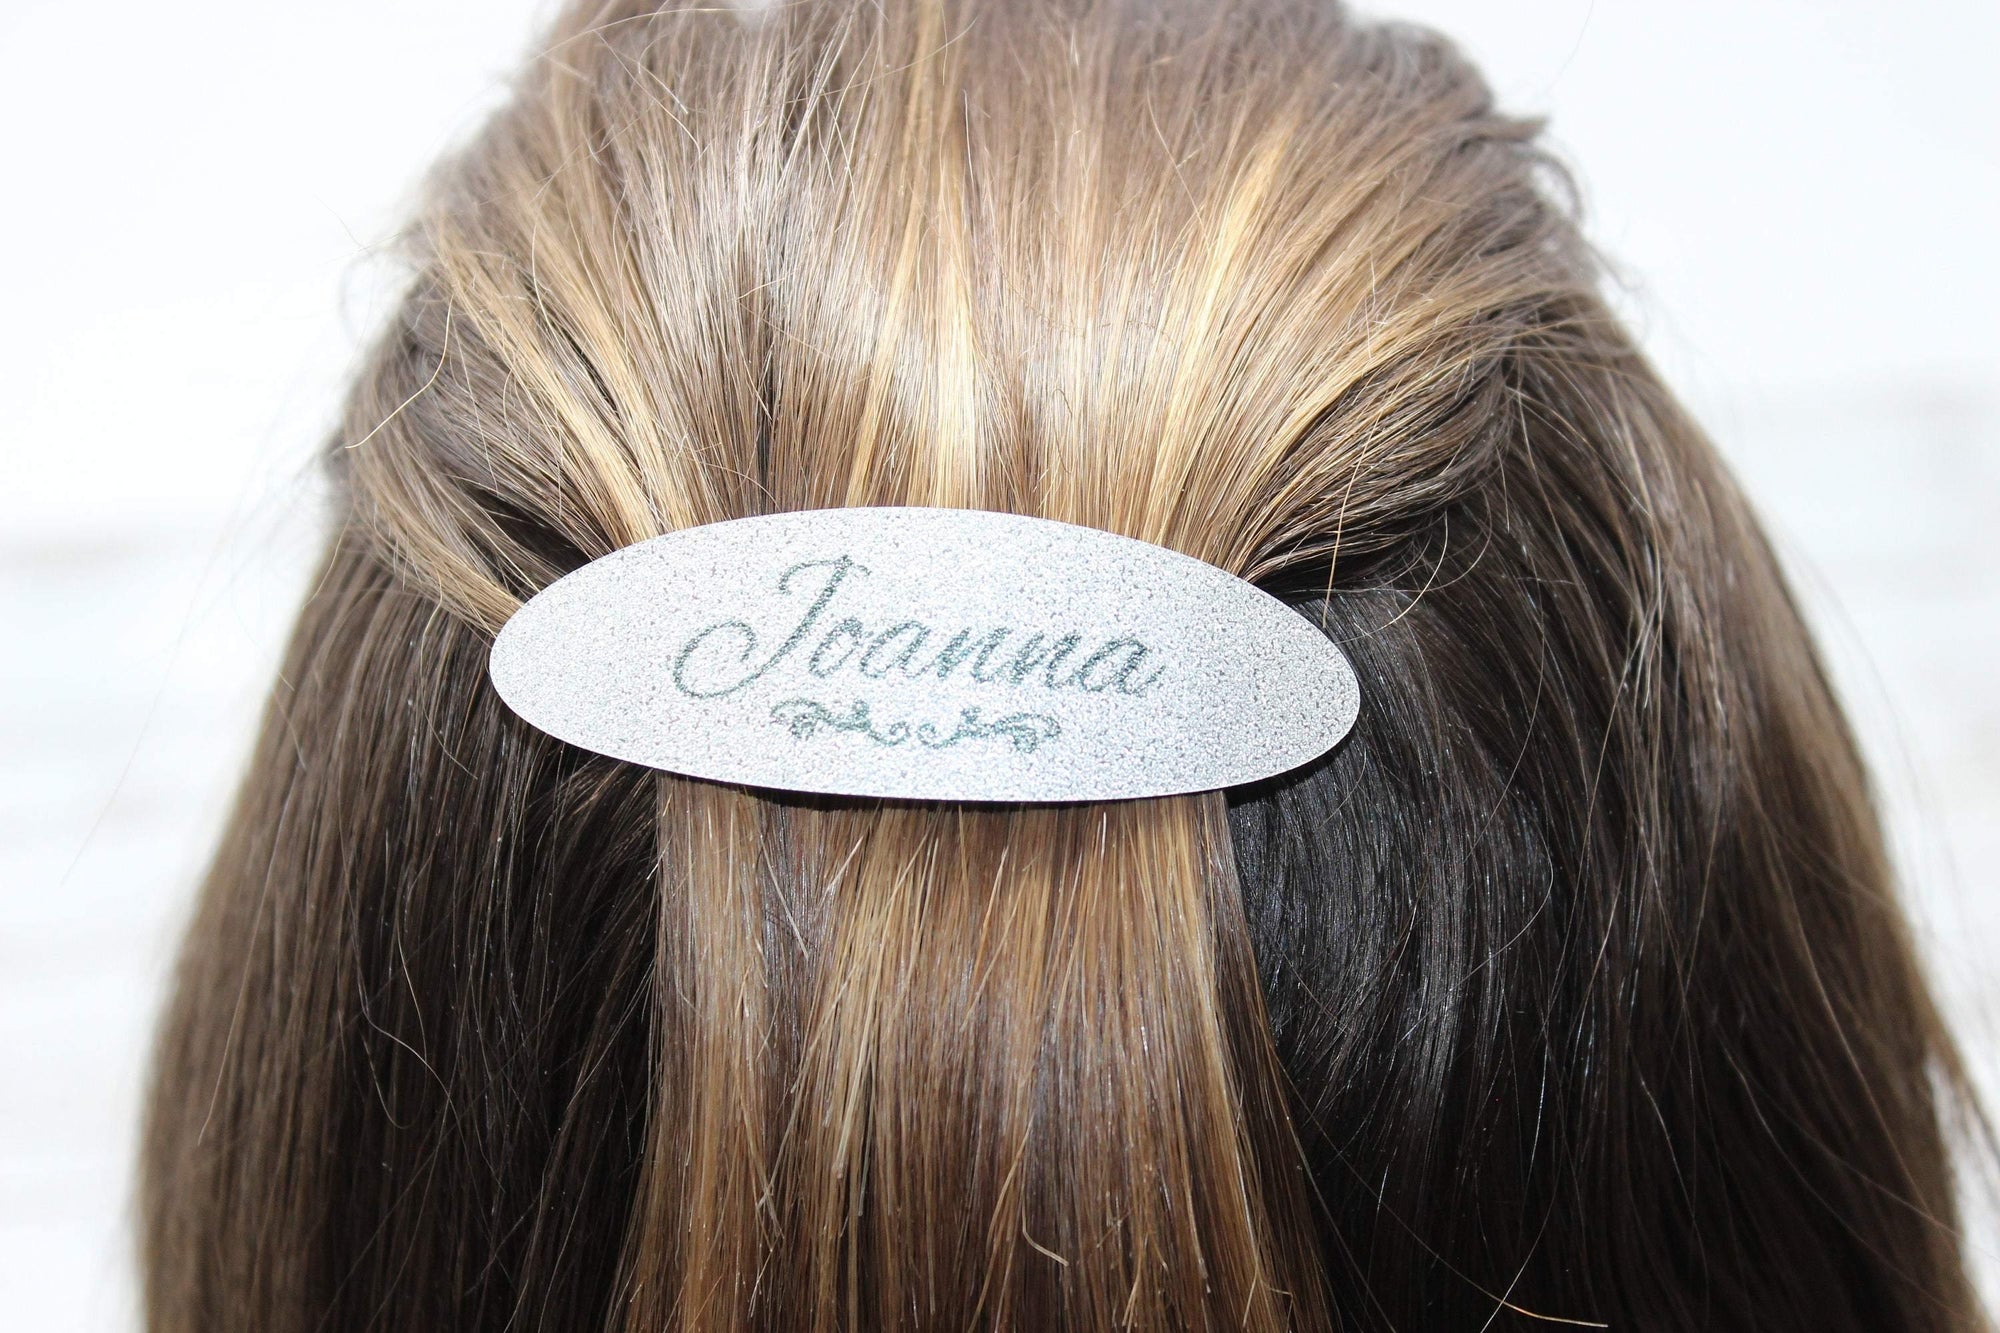 Custom Hair Barrette | Personalized Hair Accessories | Name - This & That Solutions - Custom Hair Barrette | Personalized Hair Accessories | Name - Personalized Gifts & Custom Home Decor